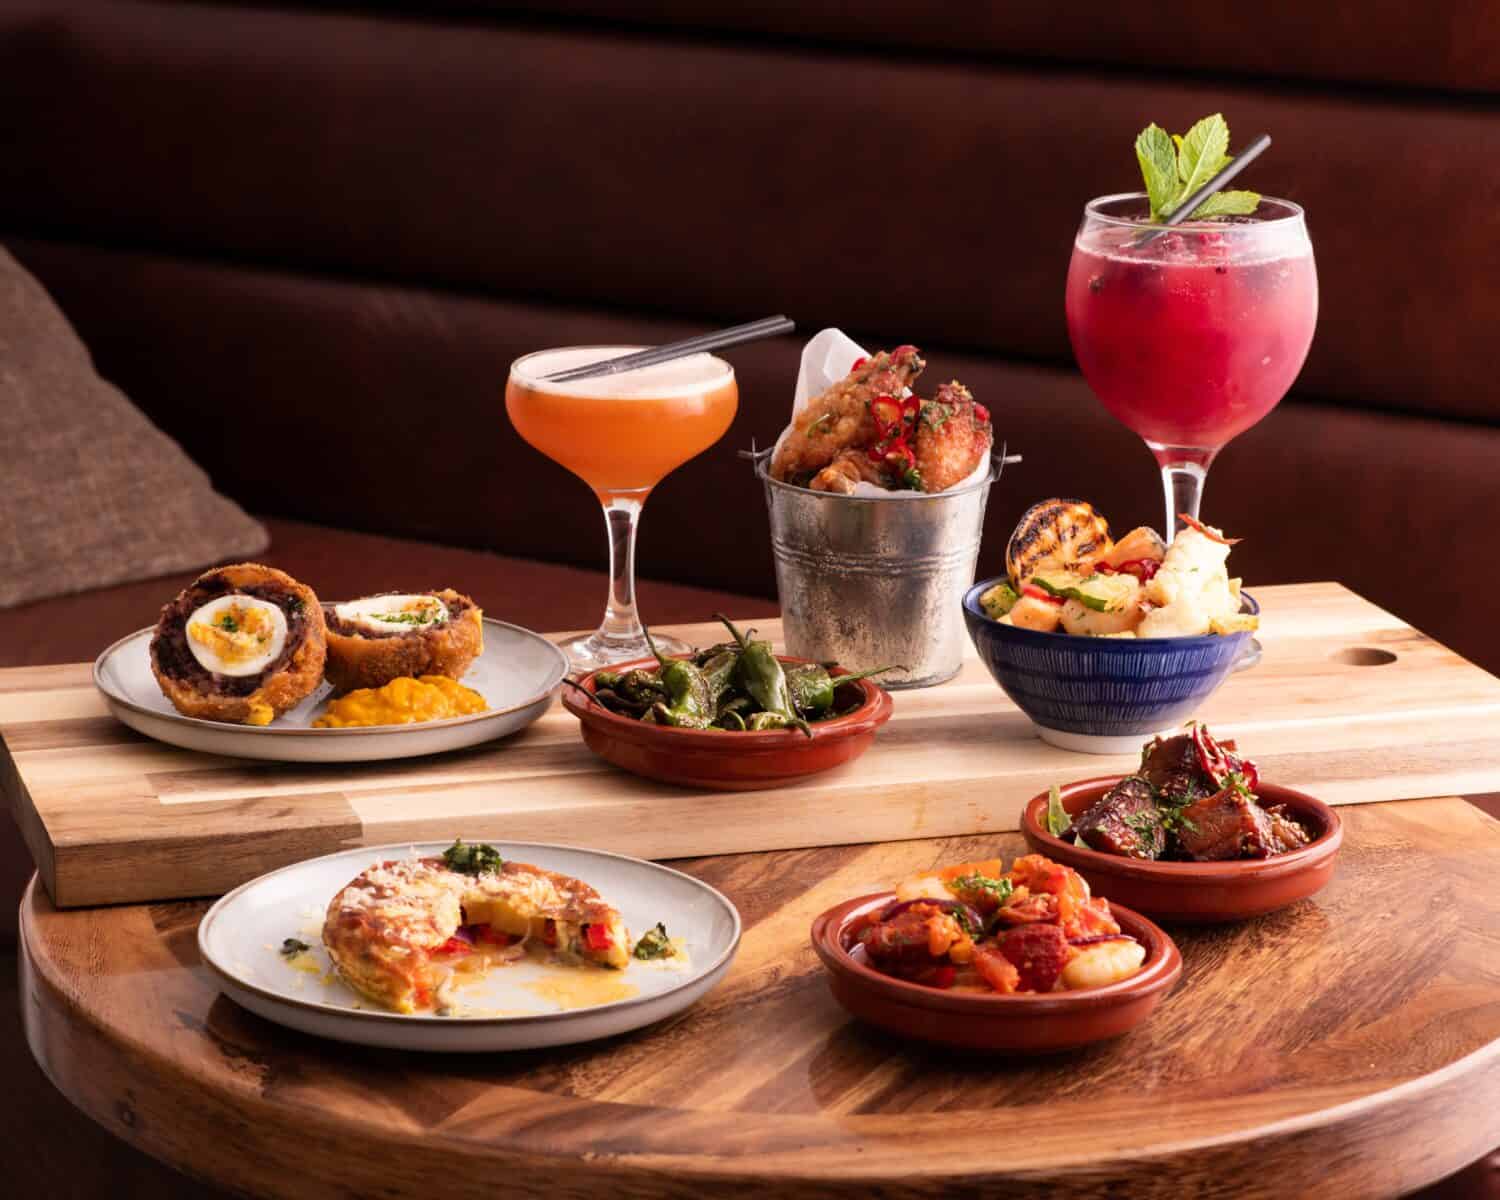 Selection of Tapas and Cocktails including Prawns, Spanish Omelette and Scotch Egg